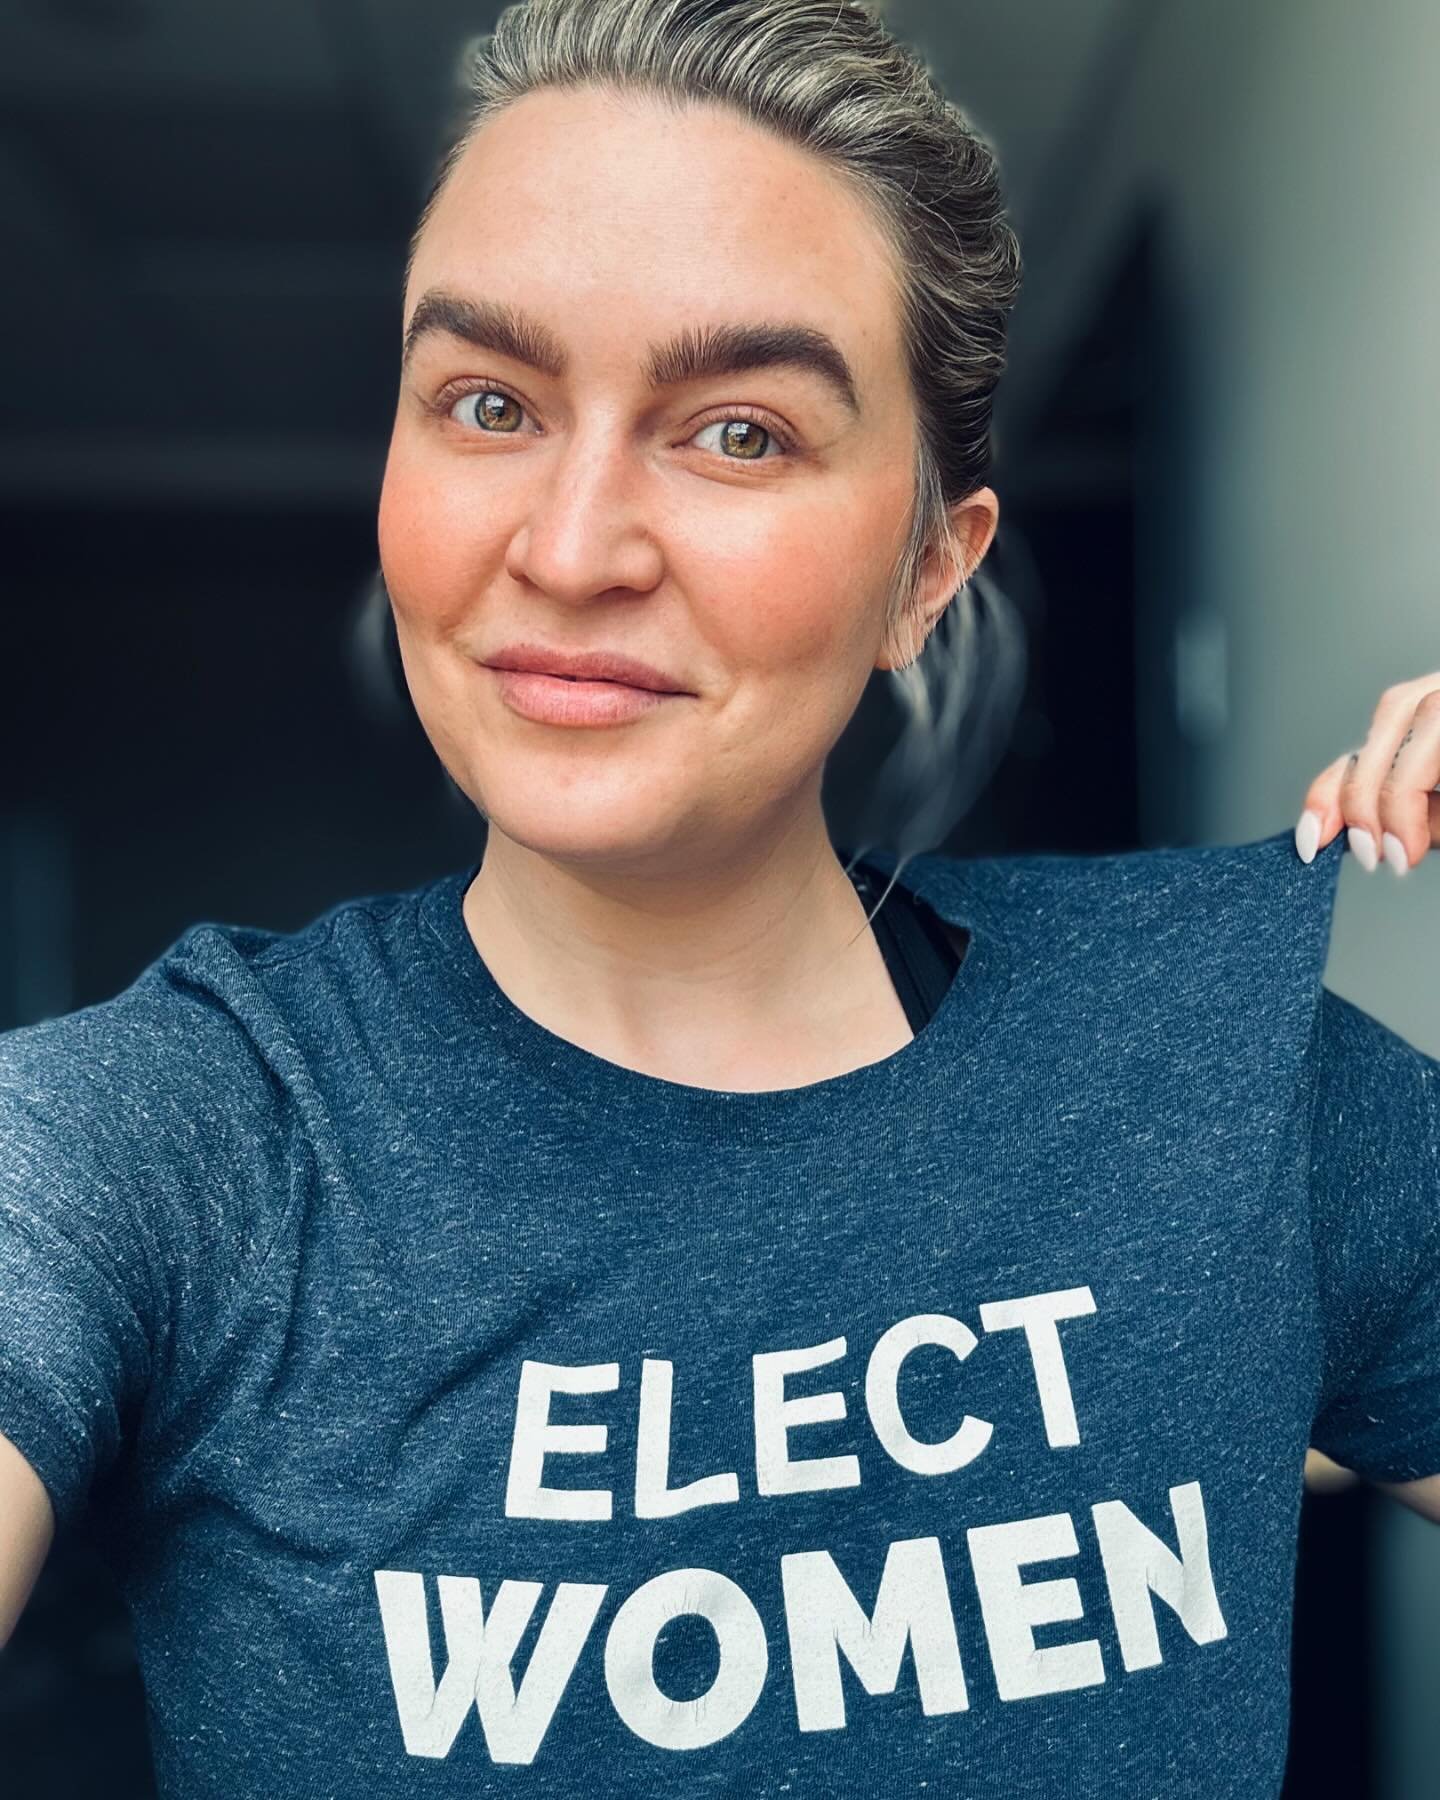 Friendly reminder &mdash; elections matter. 

Who you vote for matters. Electing women and non-binary folks matters. Voting to change the status quo matters. 

Ballots drop in a week. Let&rsquo;s go.